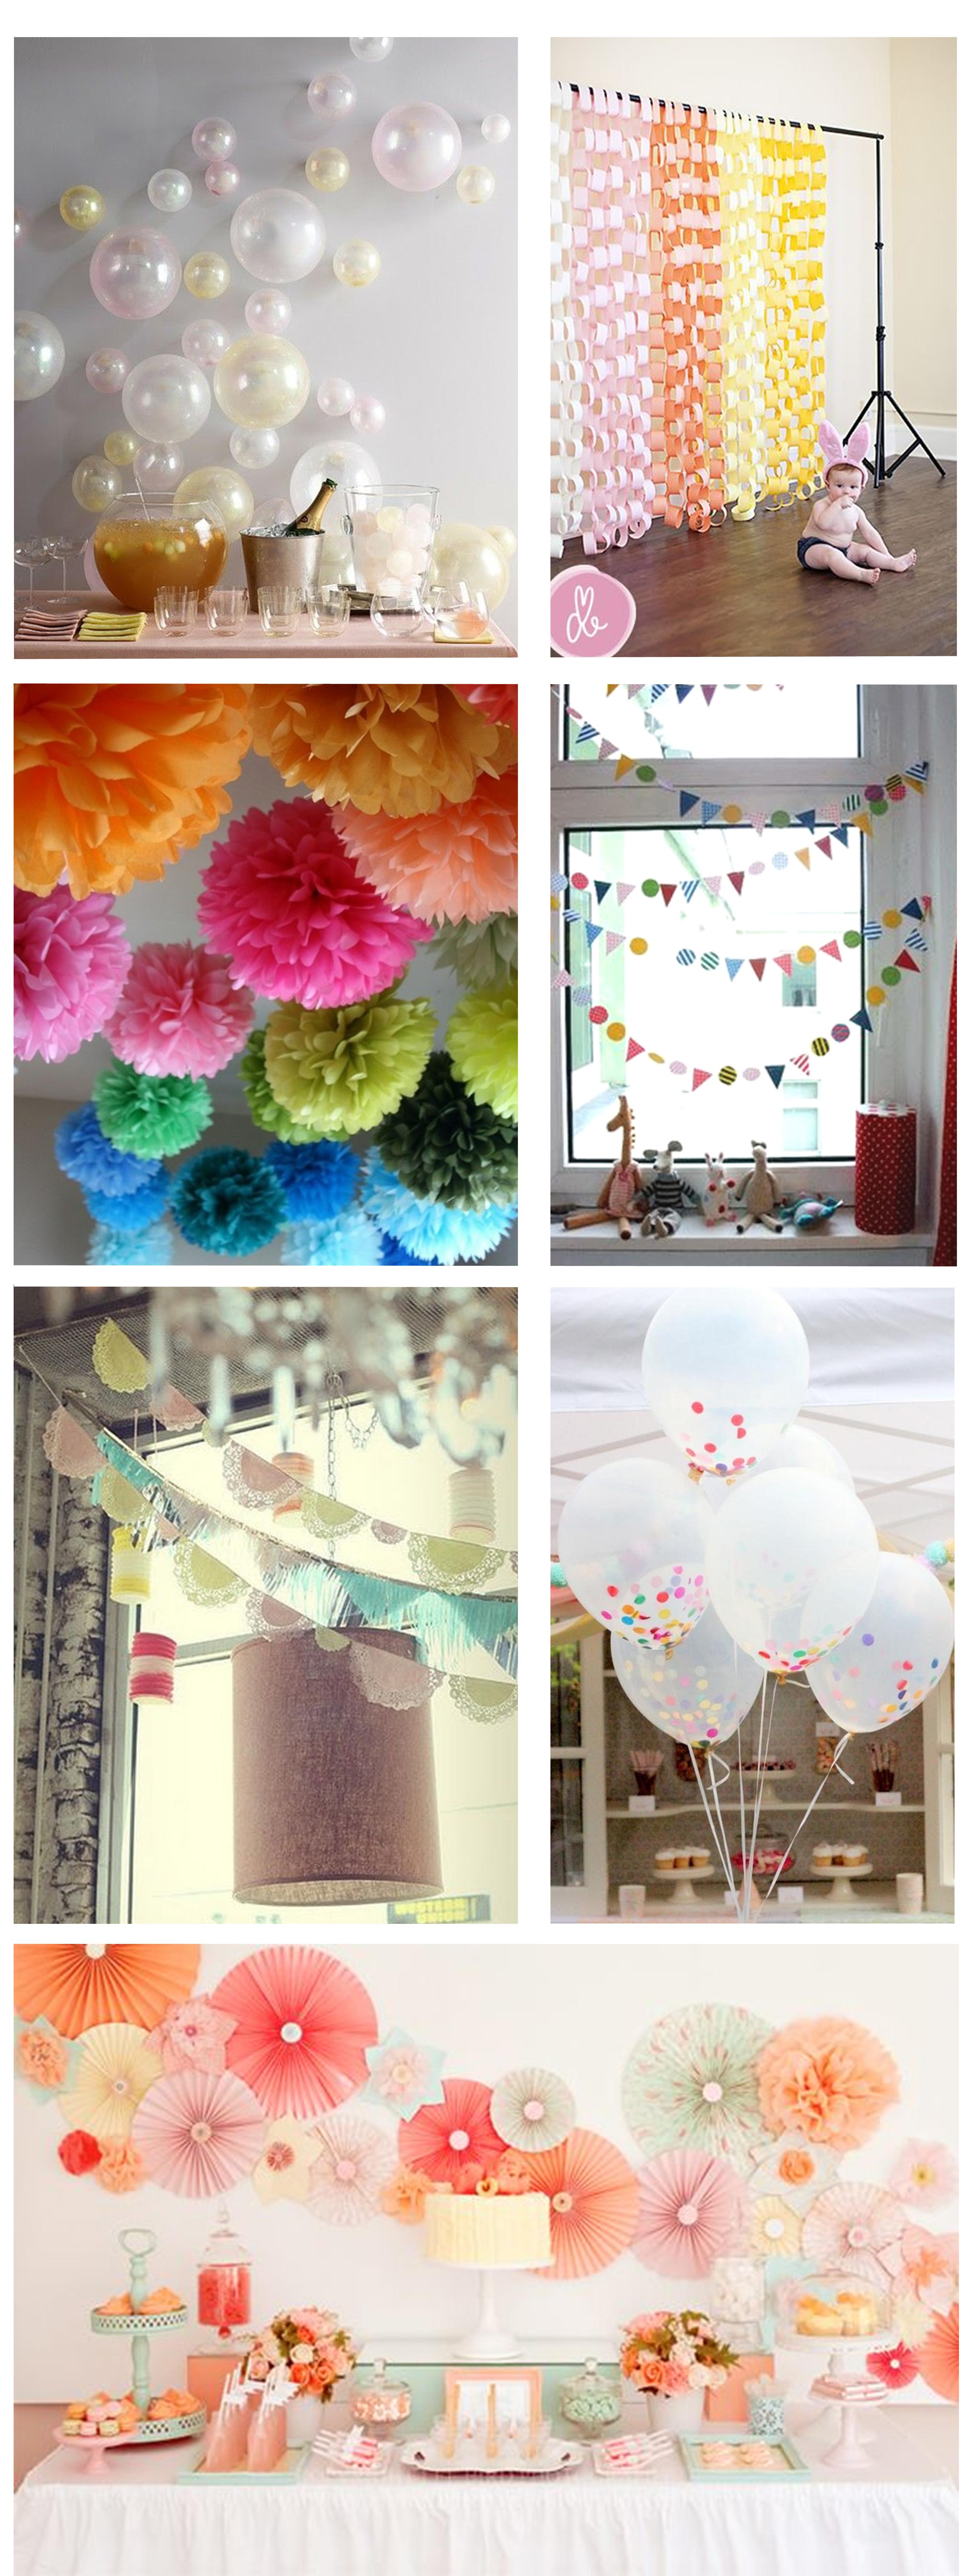 Ideas for home-made party decorations | My Thrifty Life by Cassiefairy